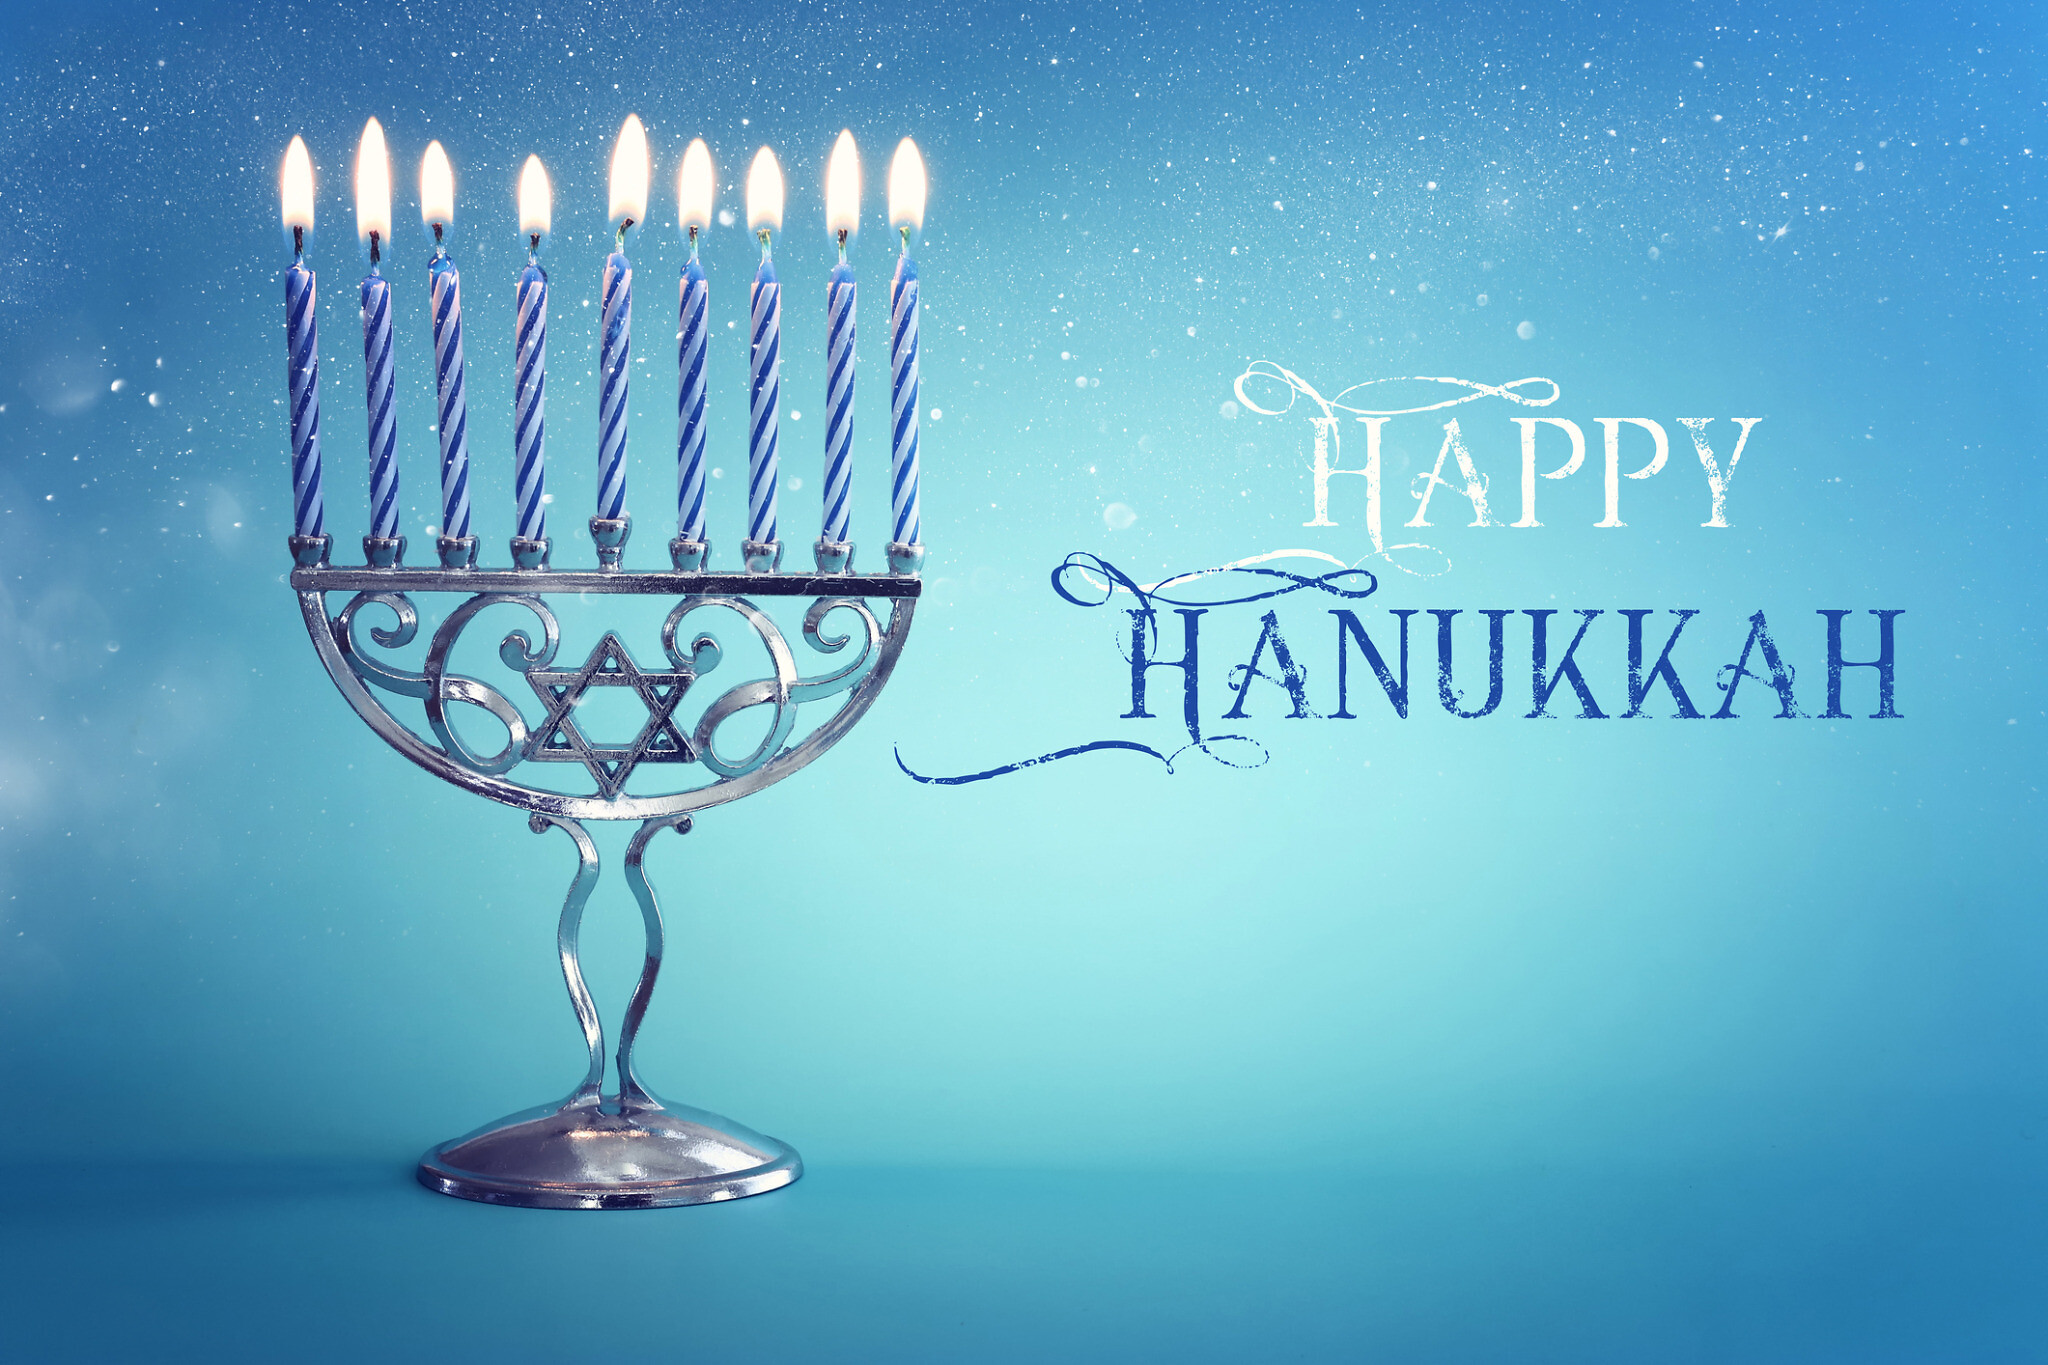 Time to light Chanukah is coming and there are plenty of places to